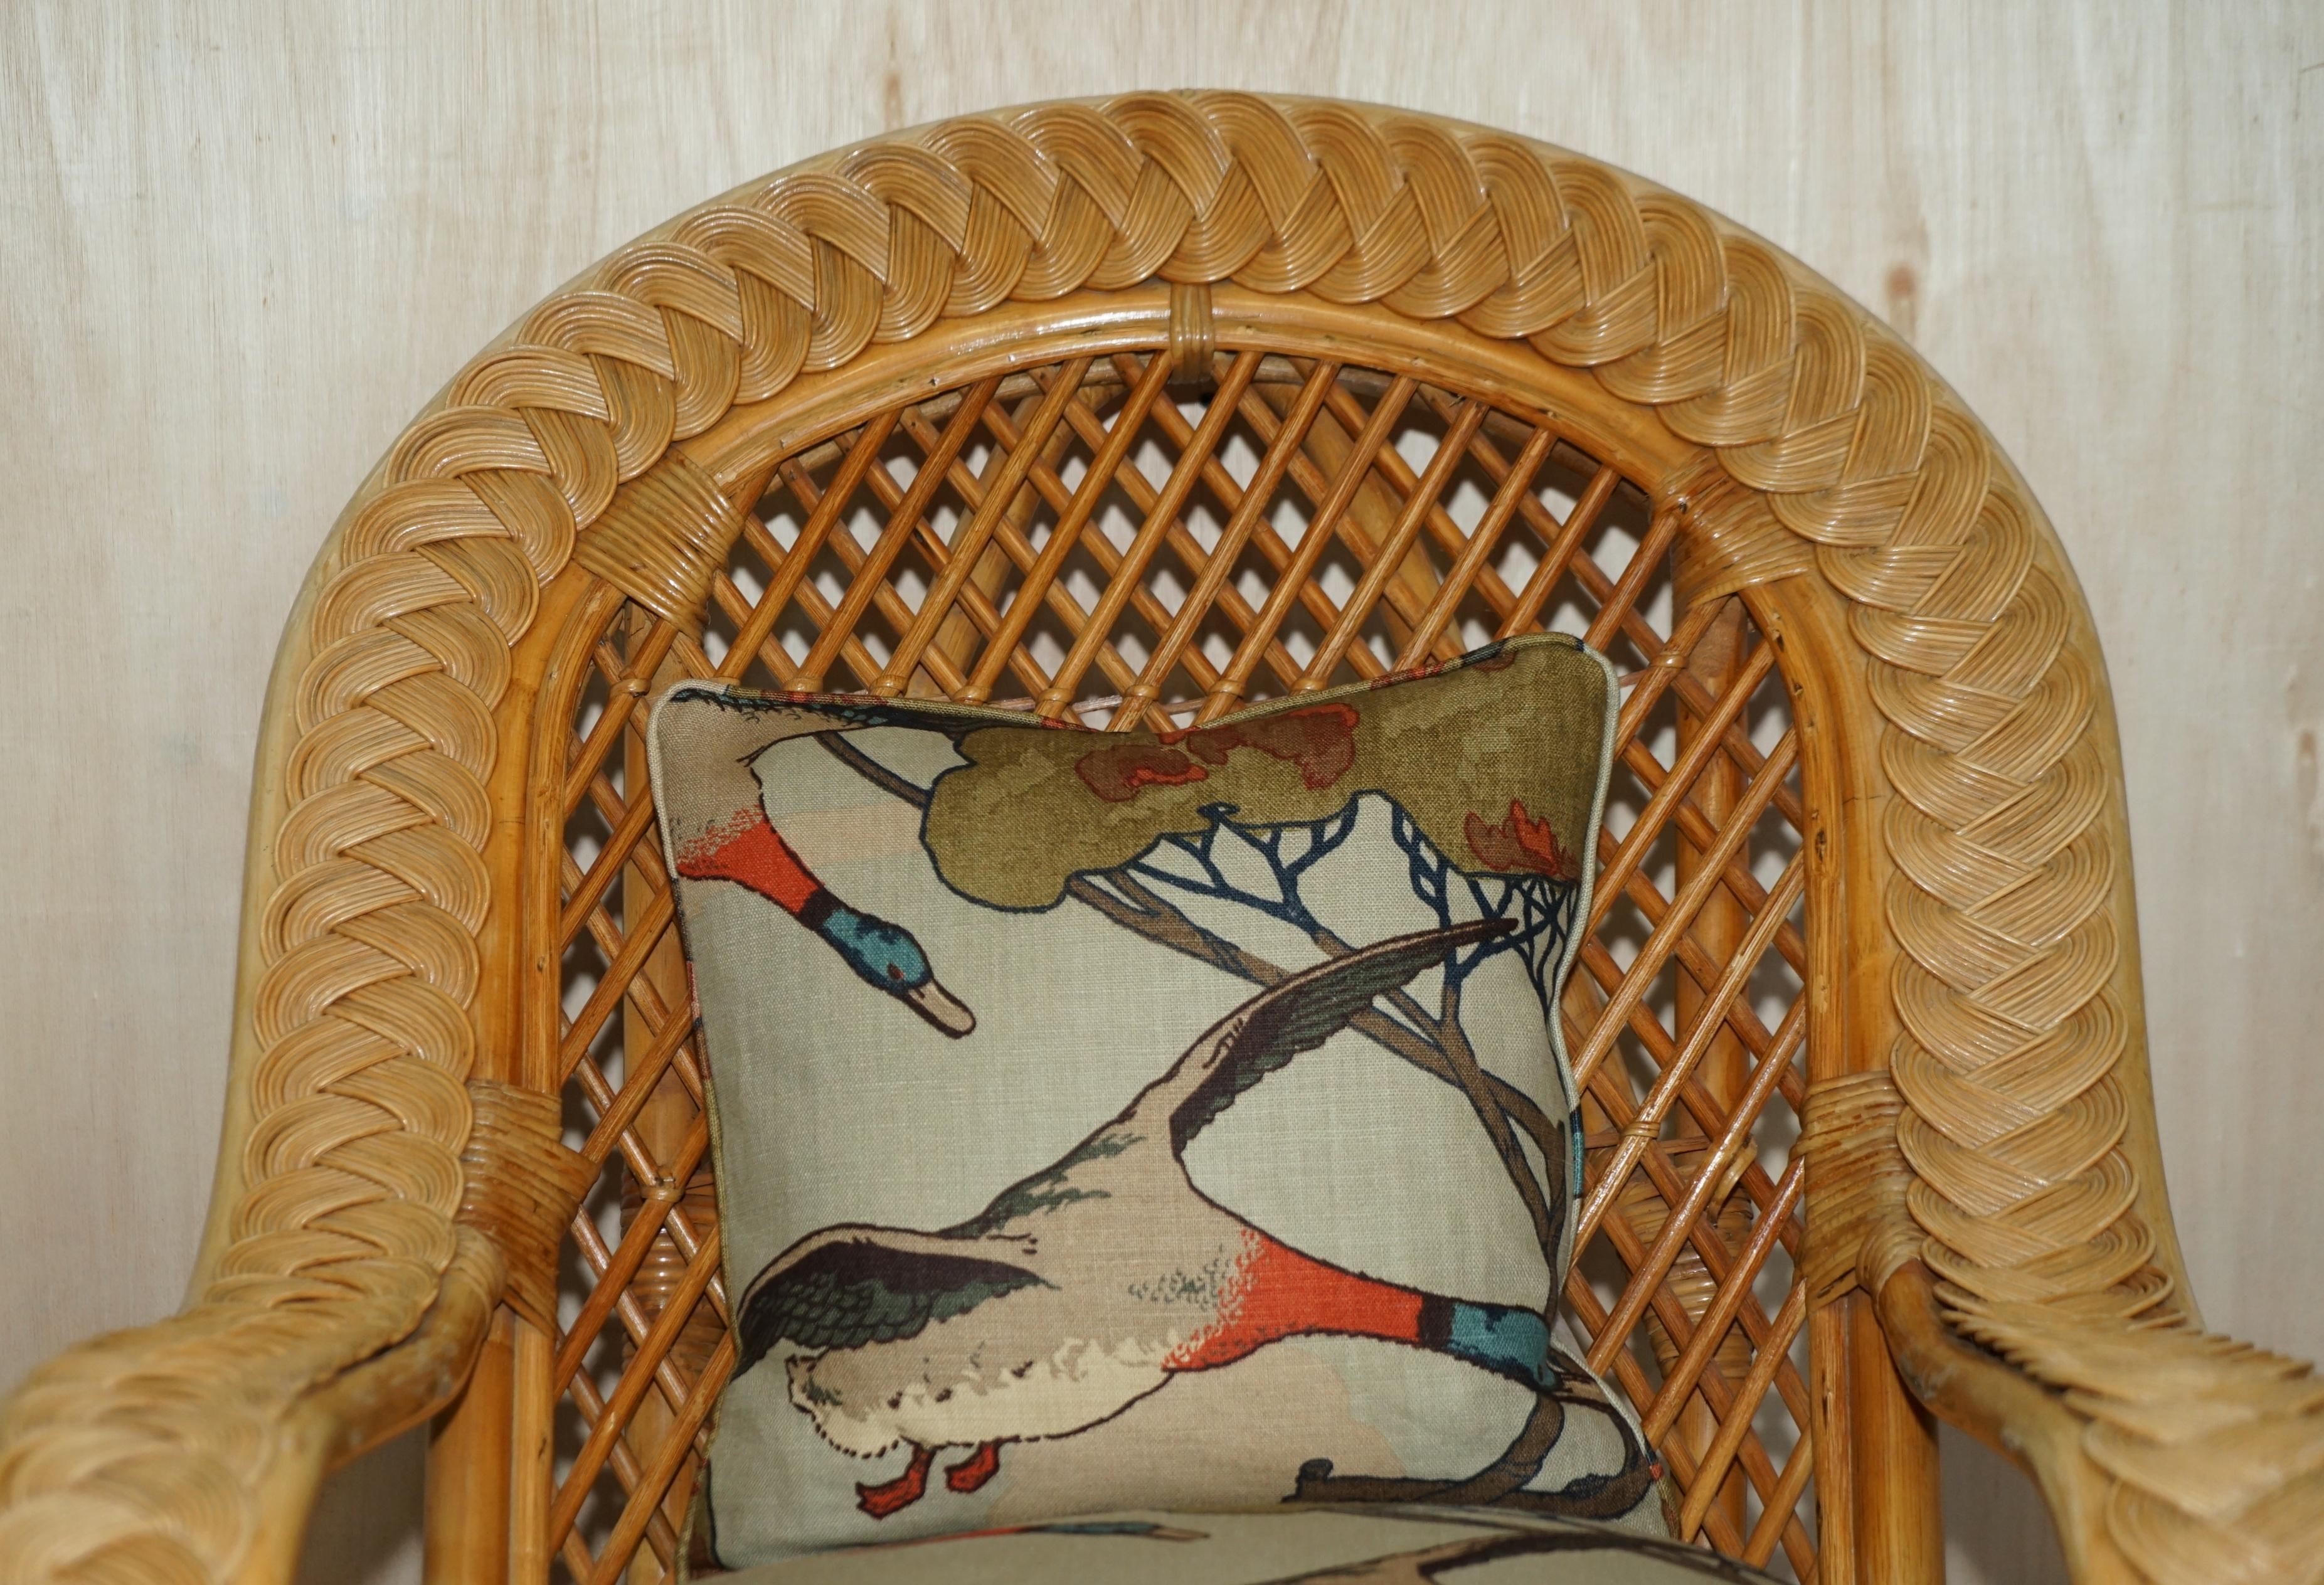 20th Century WICKER ARMCHAIRS STOOL TABLE SUITE UPHOLSTERED WiTH MULBERRY FLYING DUCKS FABRIC For Sale